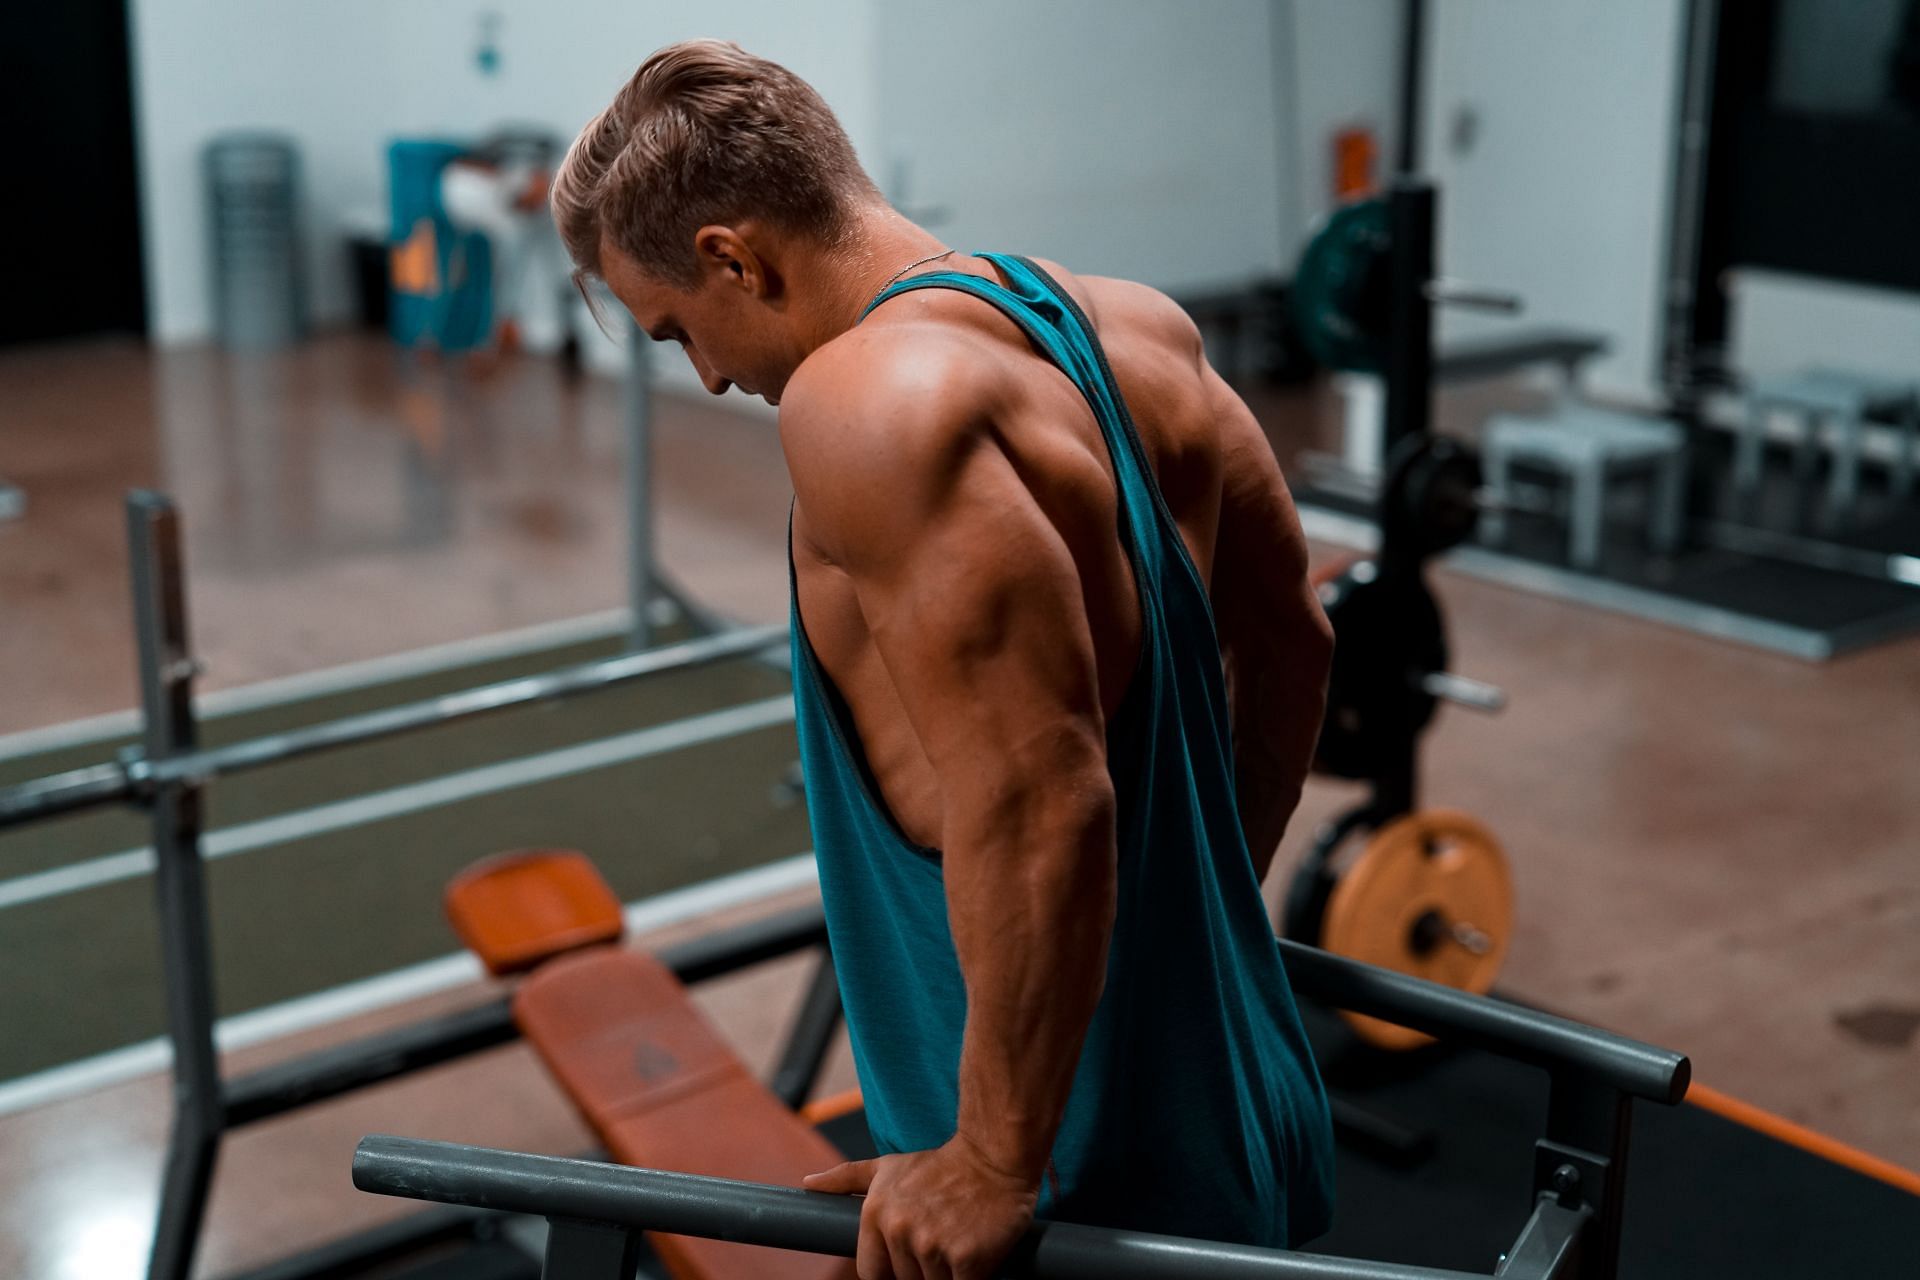 Want to gain more muscle mass and strength?(Image via Unsplash / John Fornander)